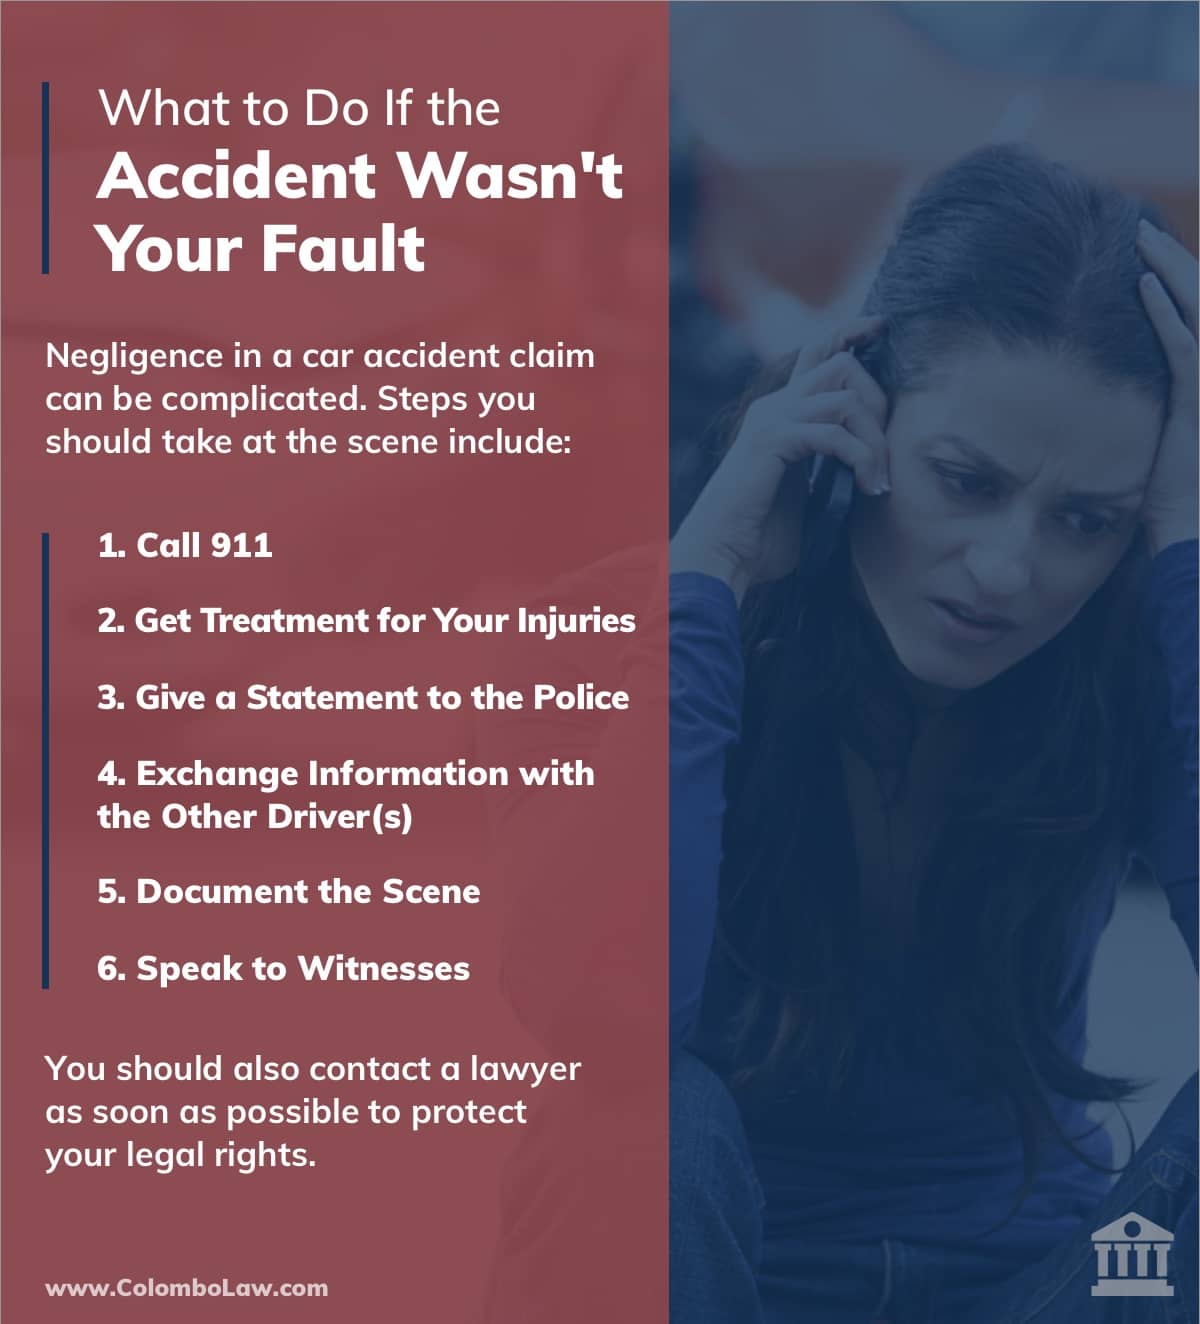 What to Do If an Accident Was Not Your Fault | Colombo Law